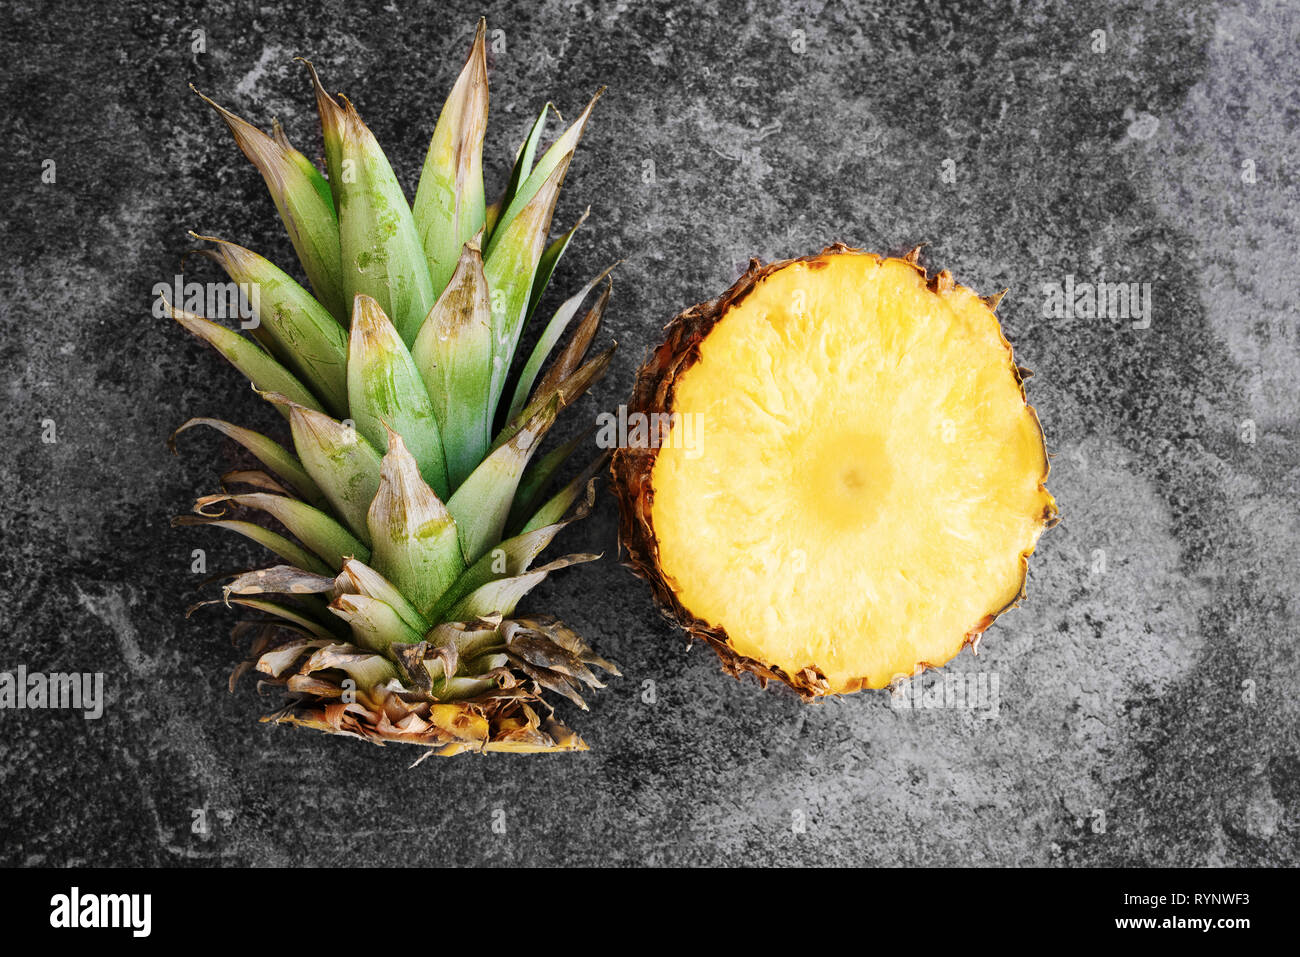 top view of pineapple sliced open on stone background Stock Photo